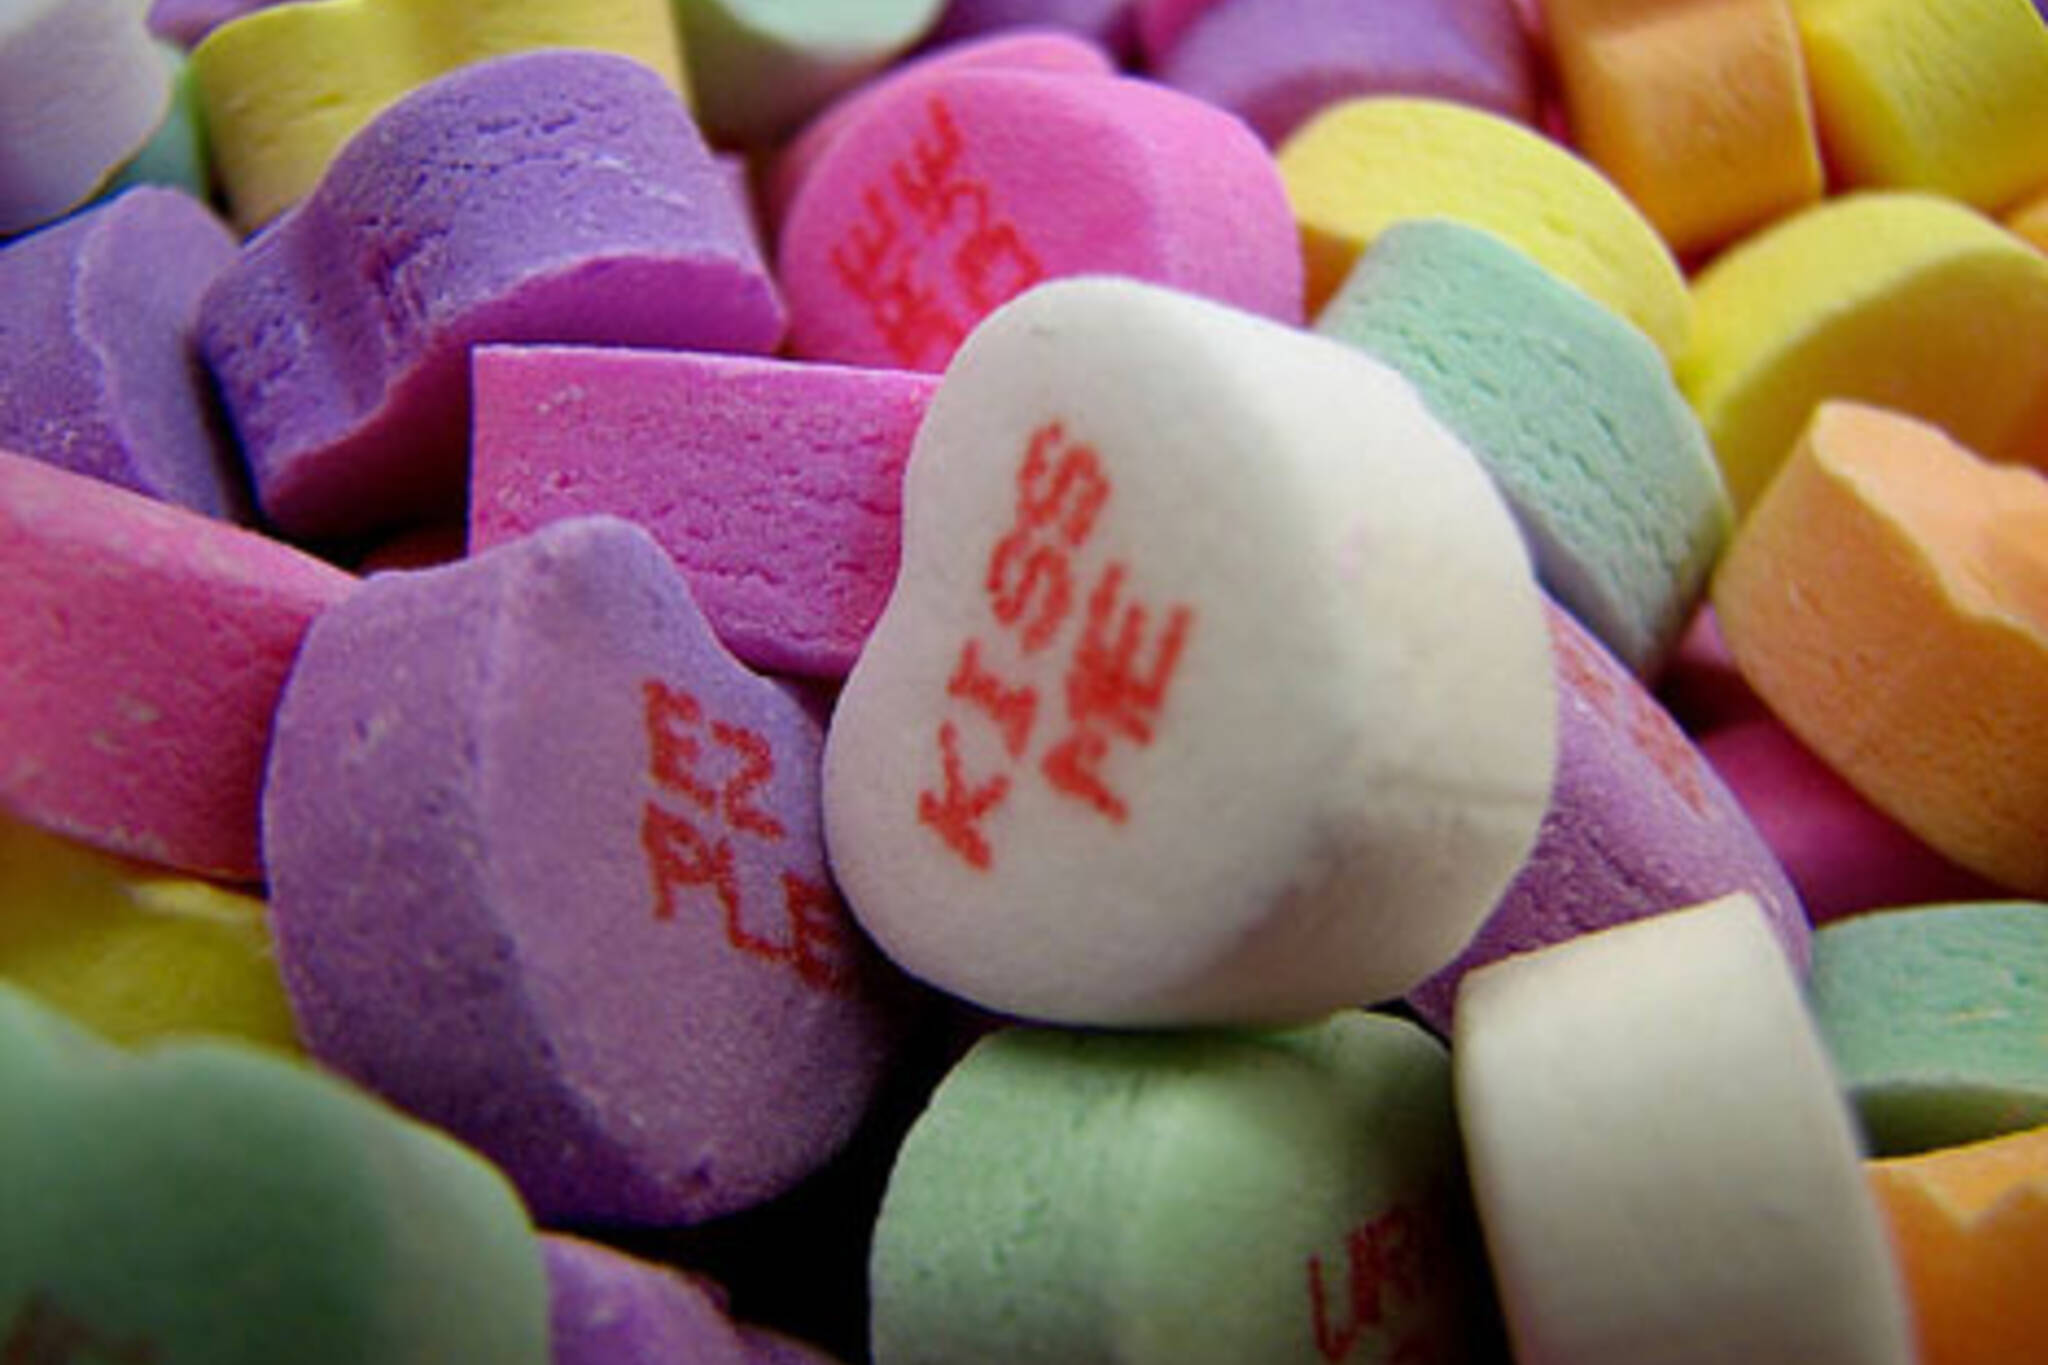 candyhearts.jpg